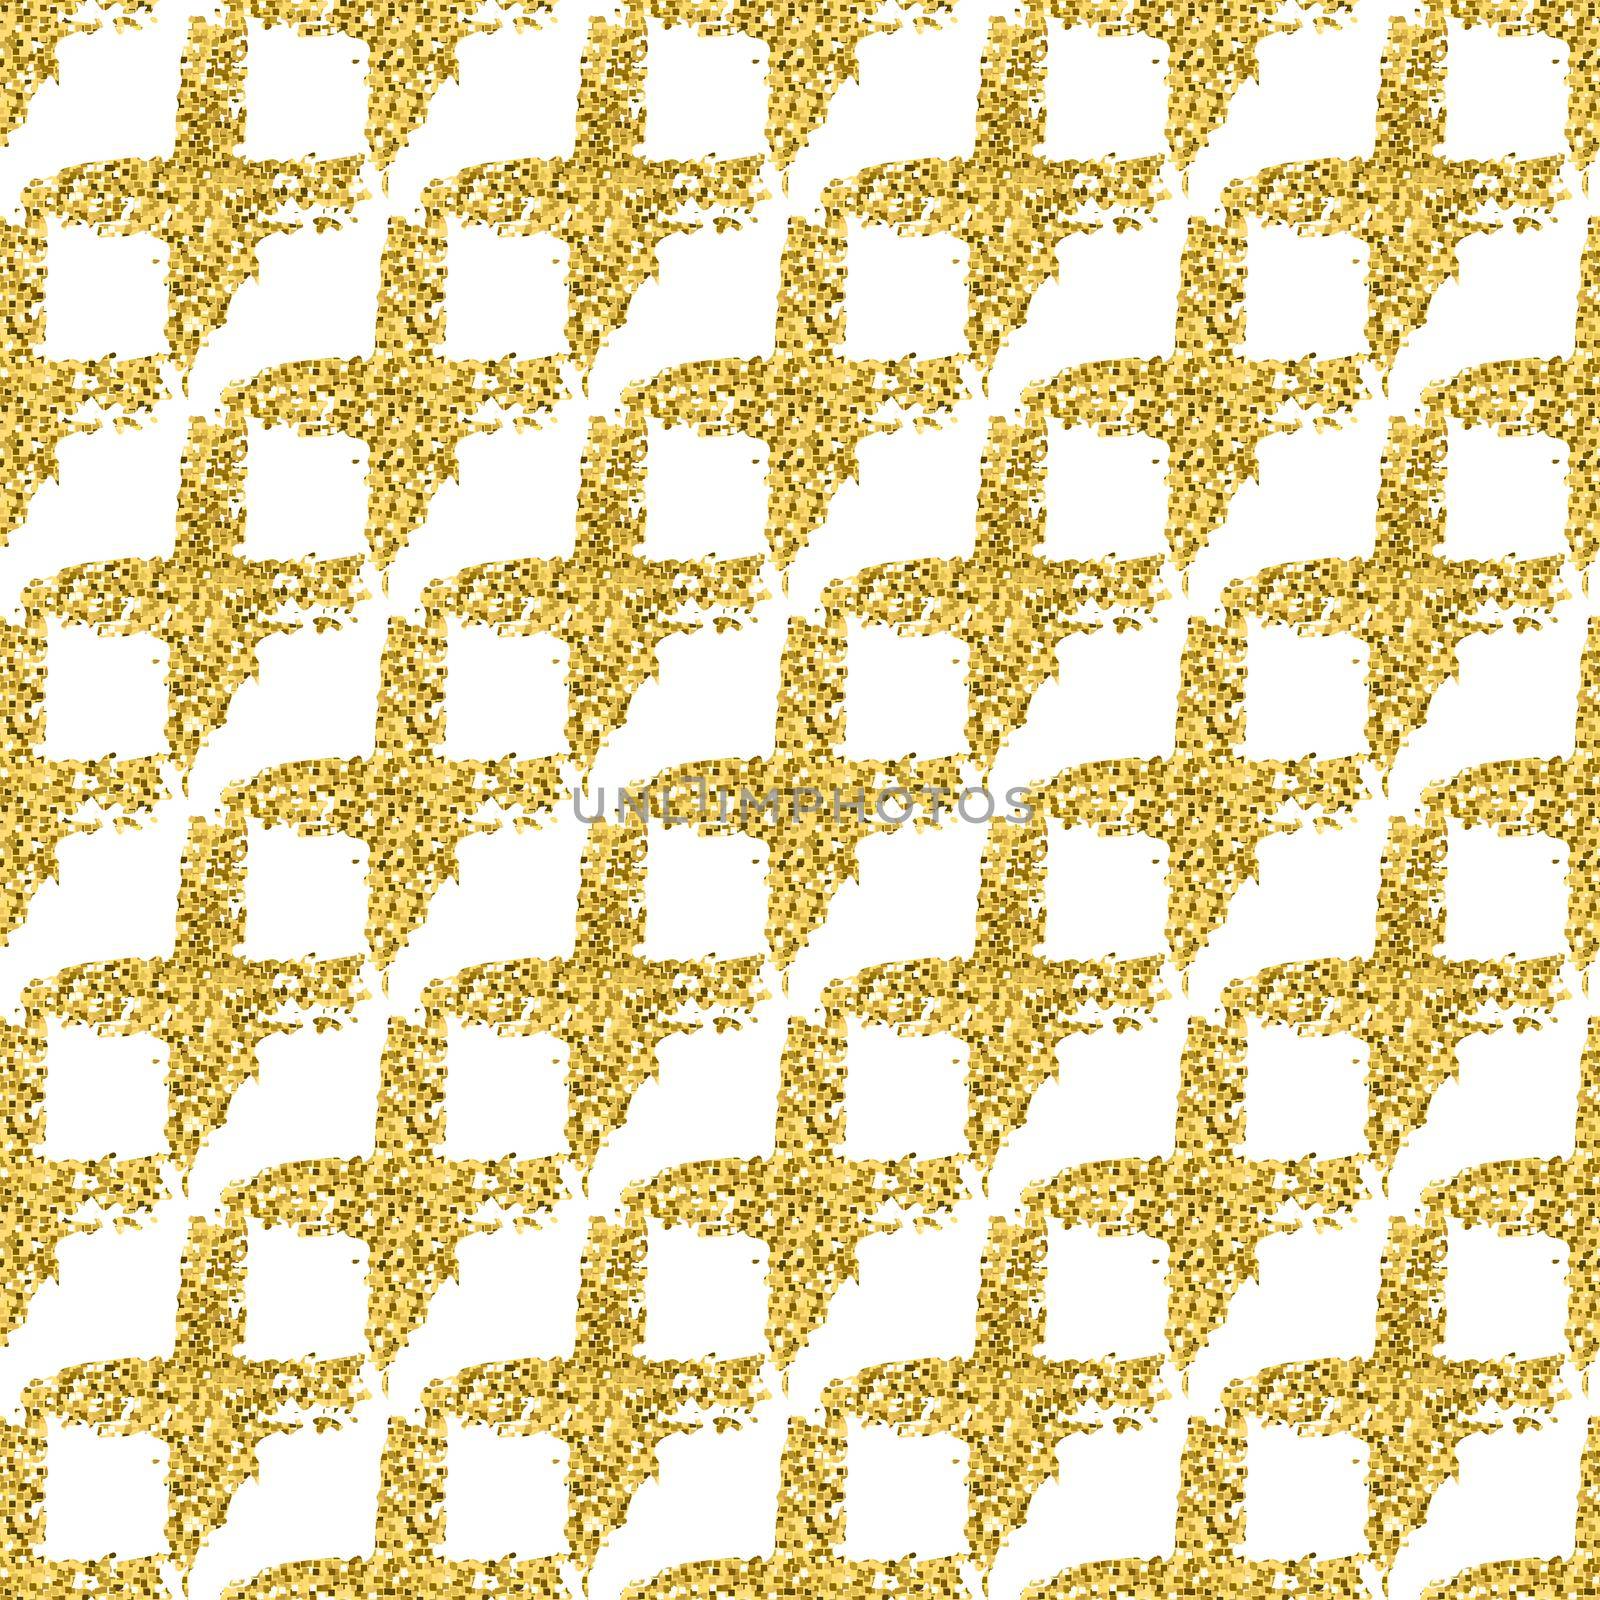 Modern seamless pattern with brush shiny cross plaid. Gold metallic color on white background. Golden glitter texture. Ink geometric elements. Fashion catwalk style. Repeat fabric cloth print tartan